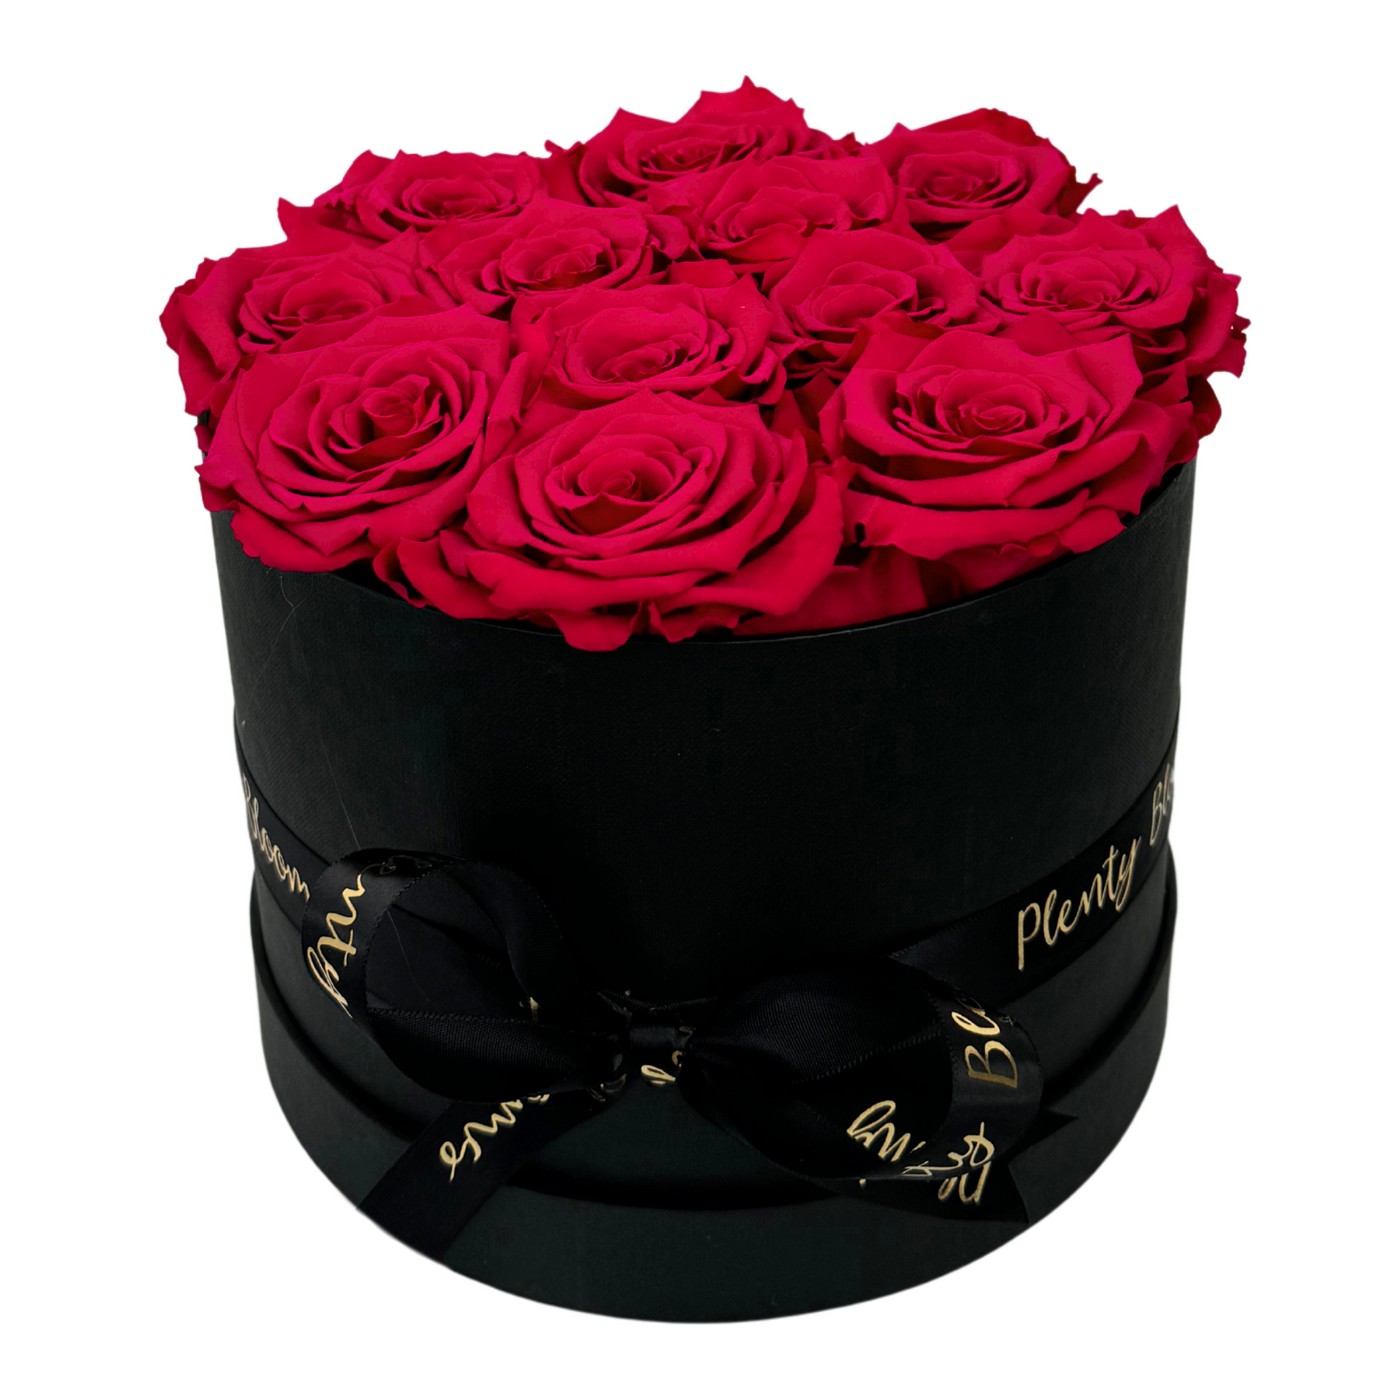 Signature Hot Pink Preserved Roses Gift Box